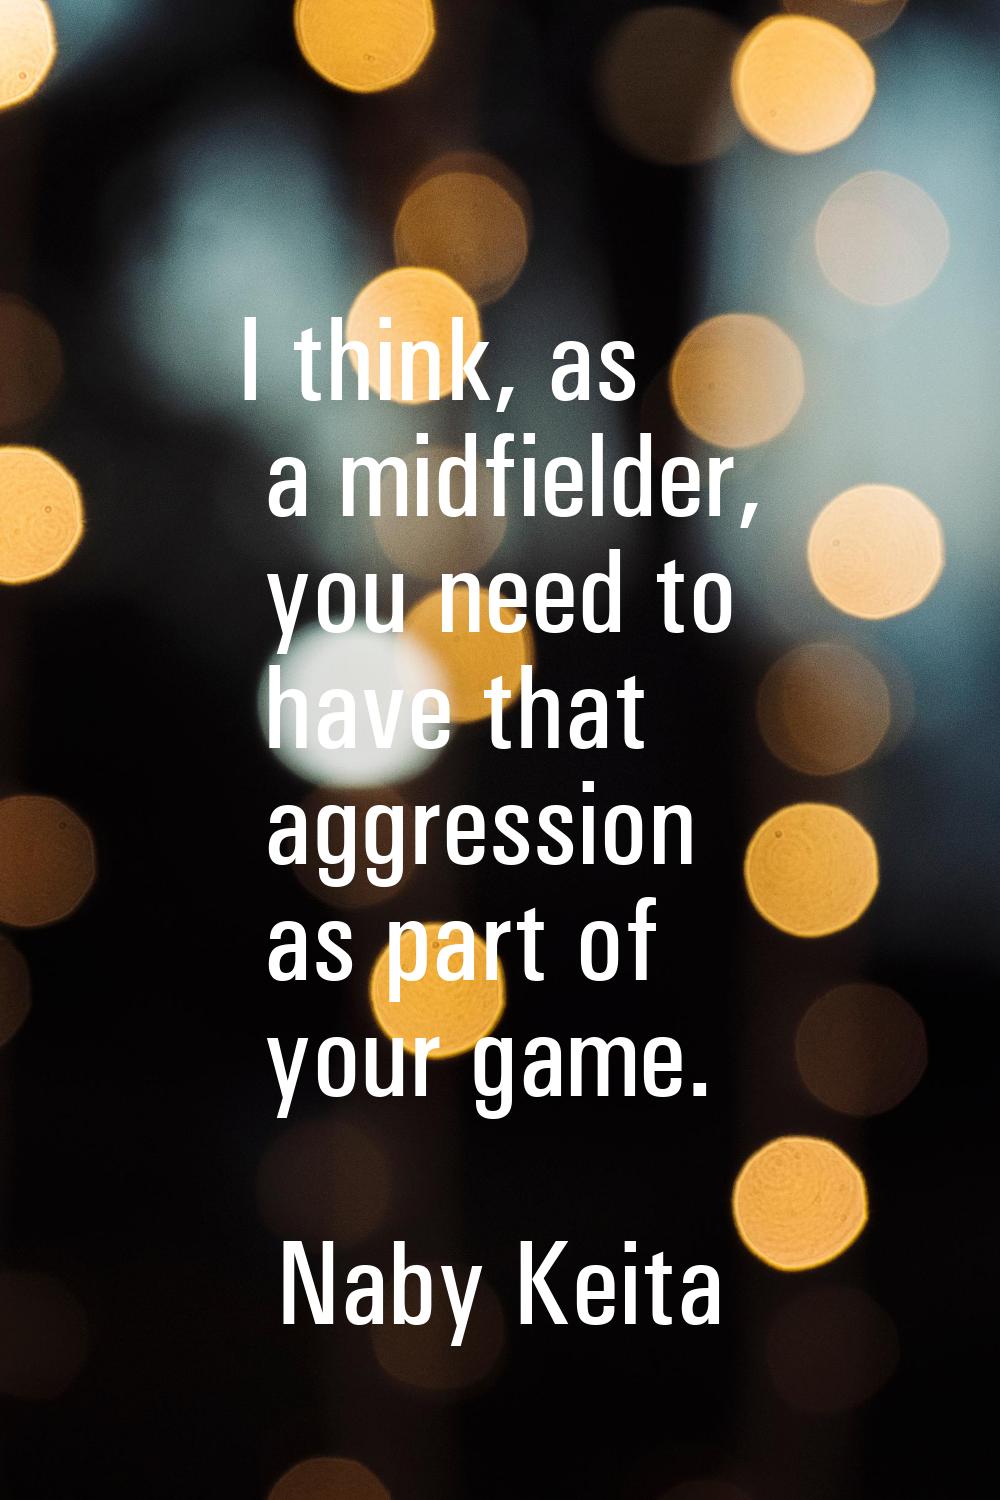 I think, as a midfielder, you need to have that aggression as part of your game.